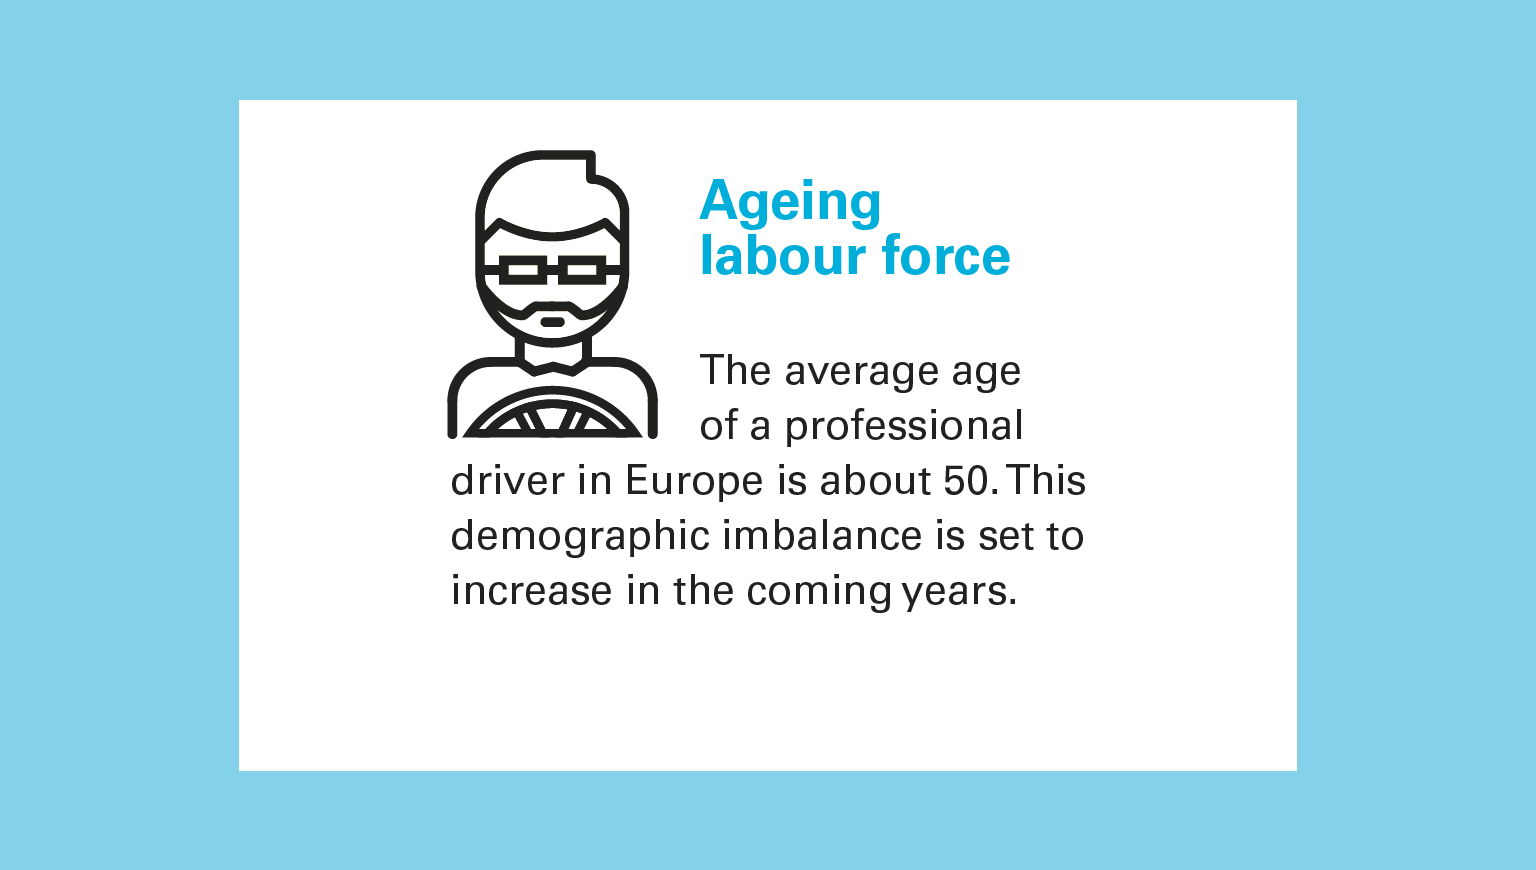 Ageing labour force